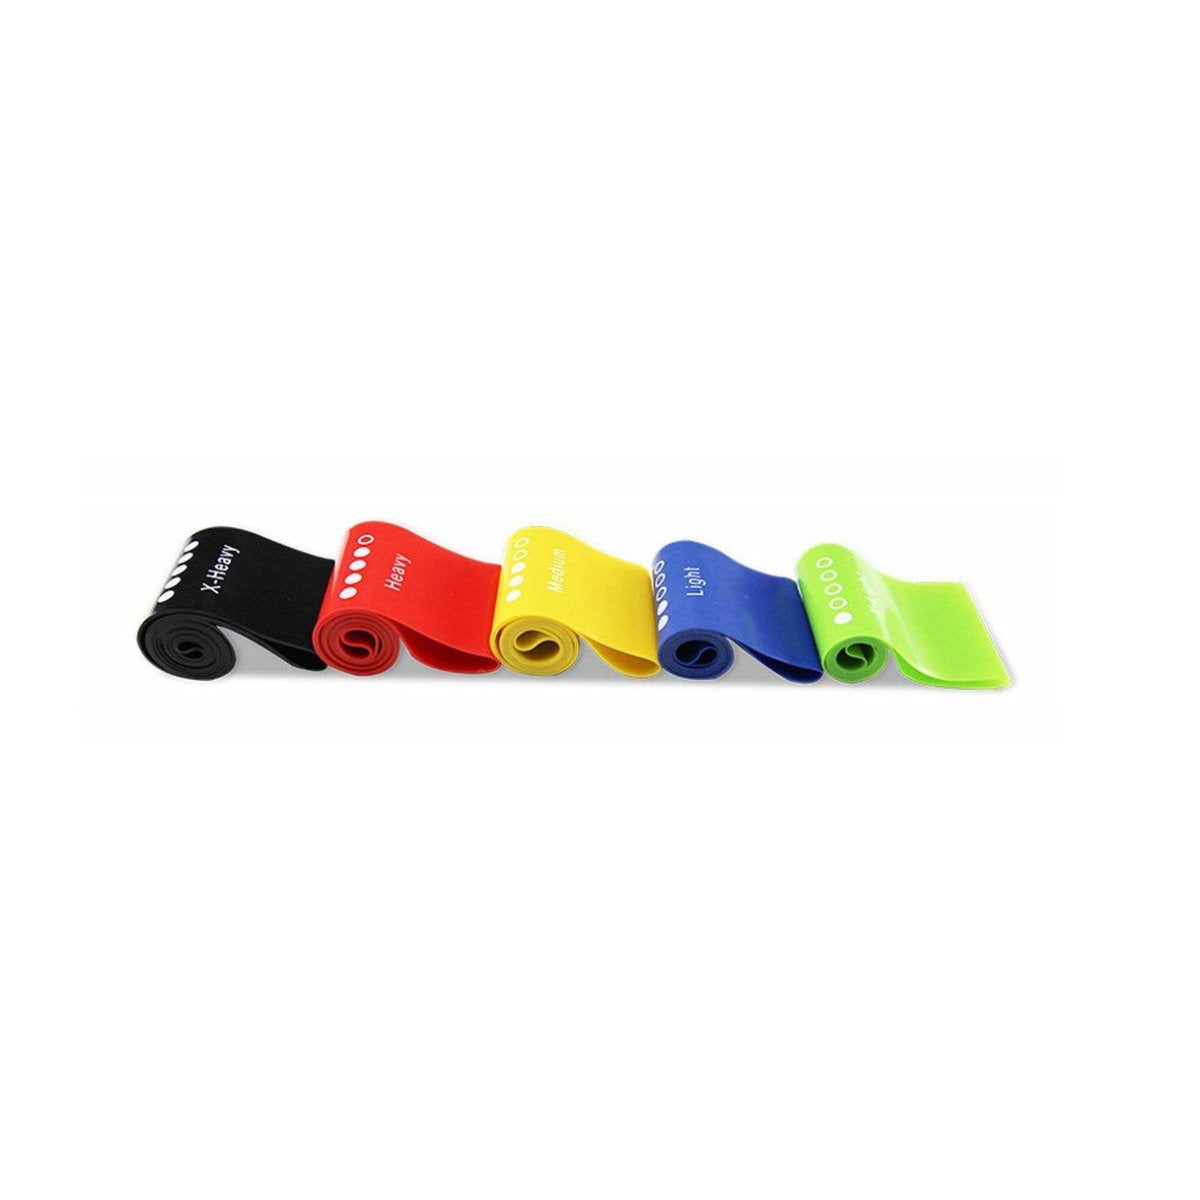 Resistance Exercise Latex Bands - Set of 5